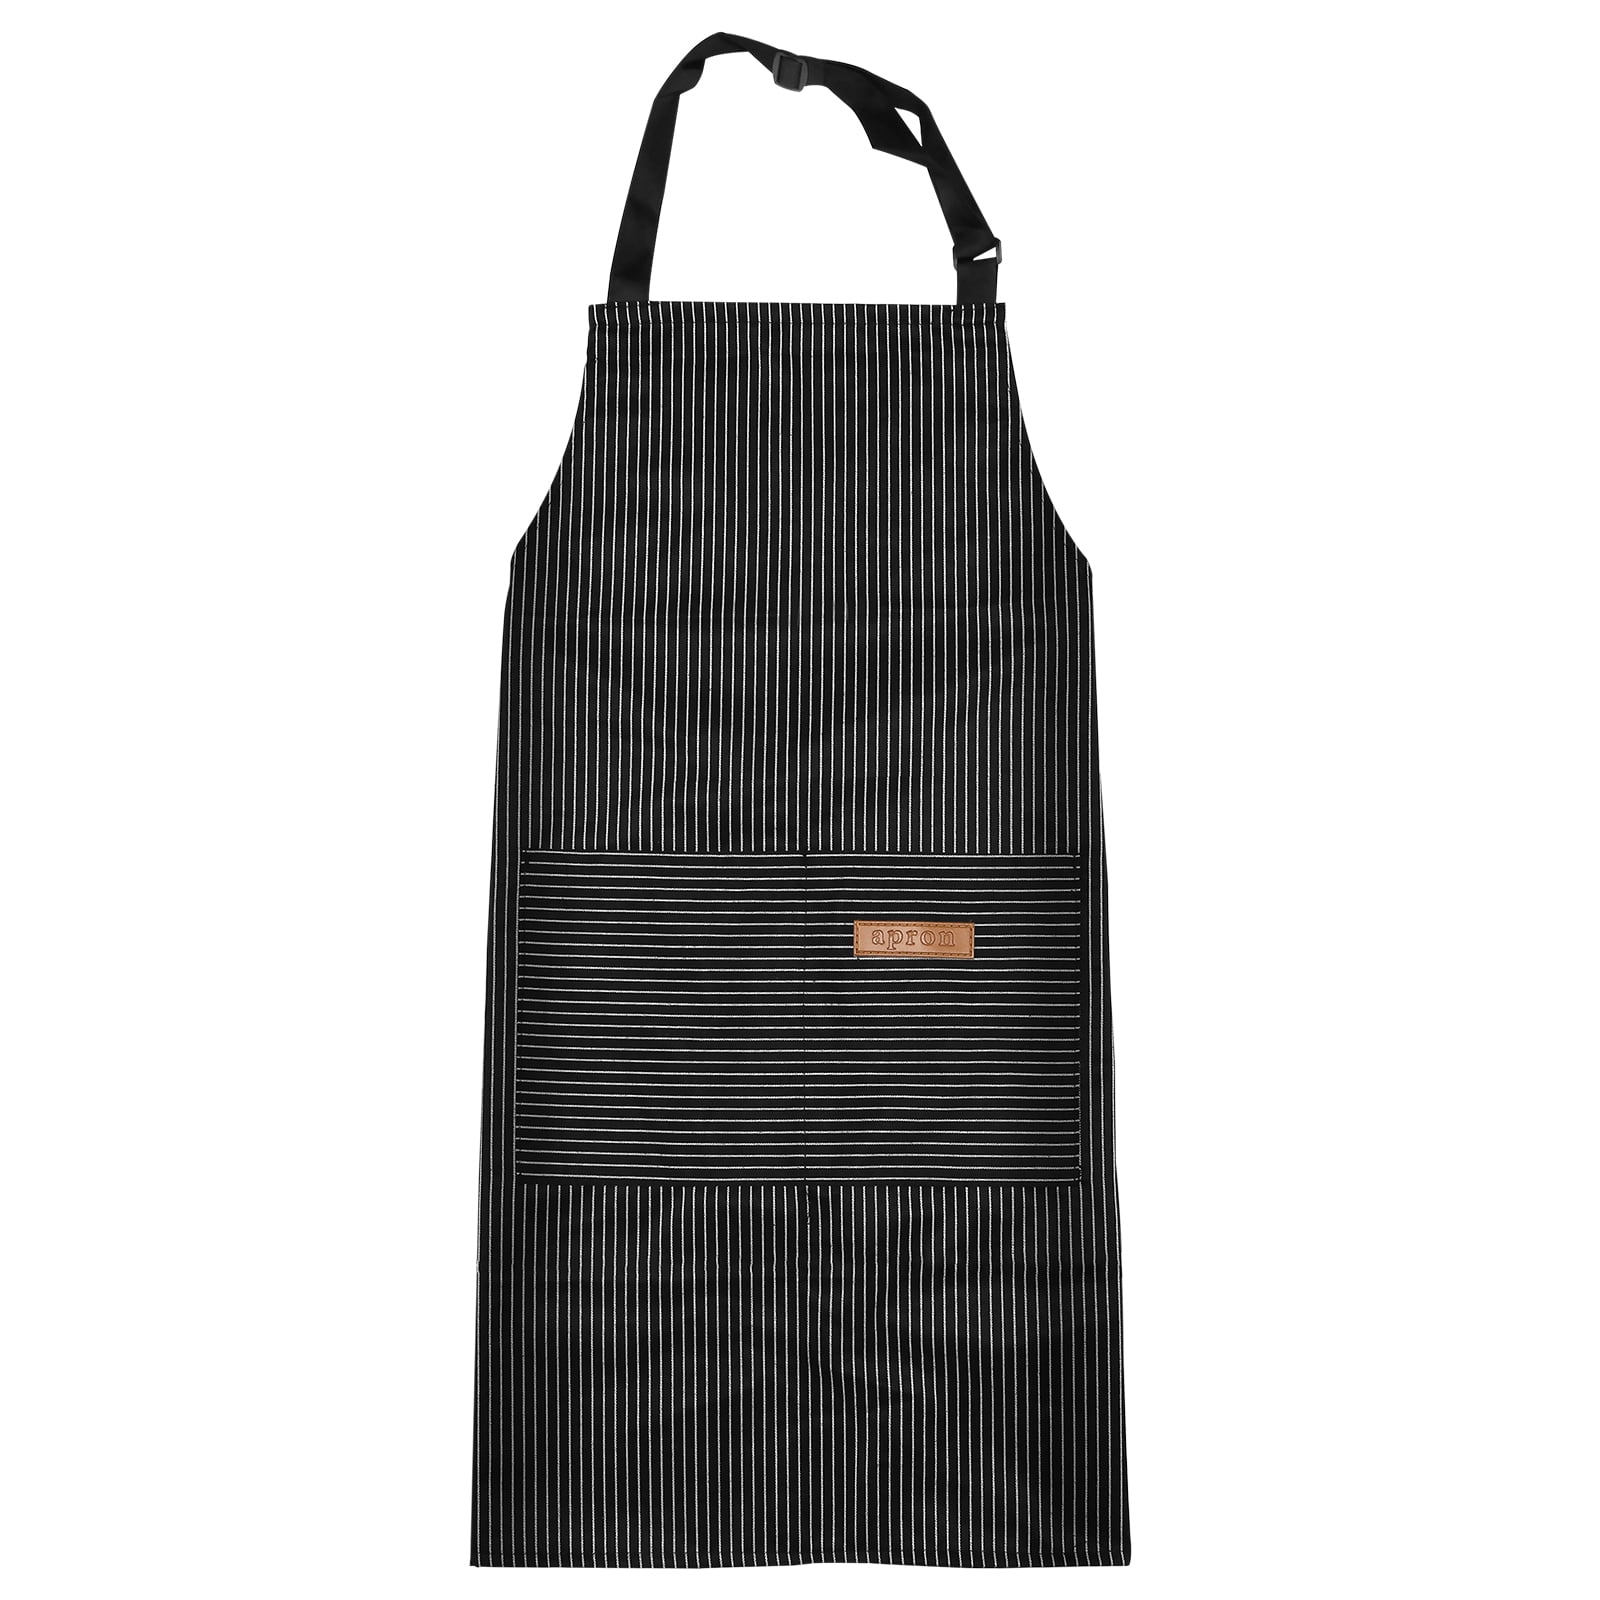 Cuh Cooking Kitchen Apron with Pocket Check Chef Apron Dress for Women Men Adults for Baking Restaurant Tool, Green